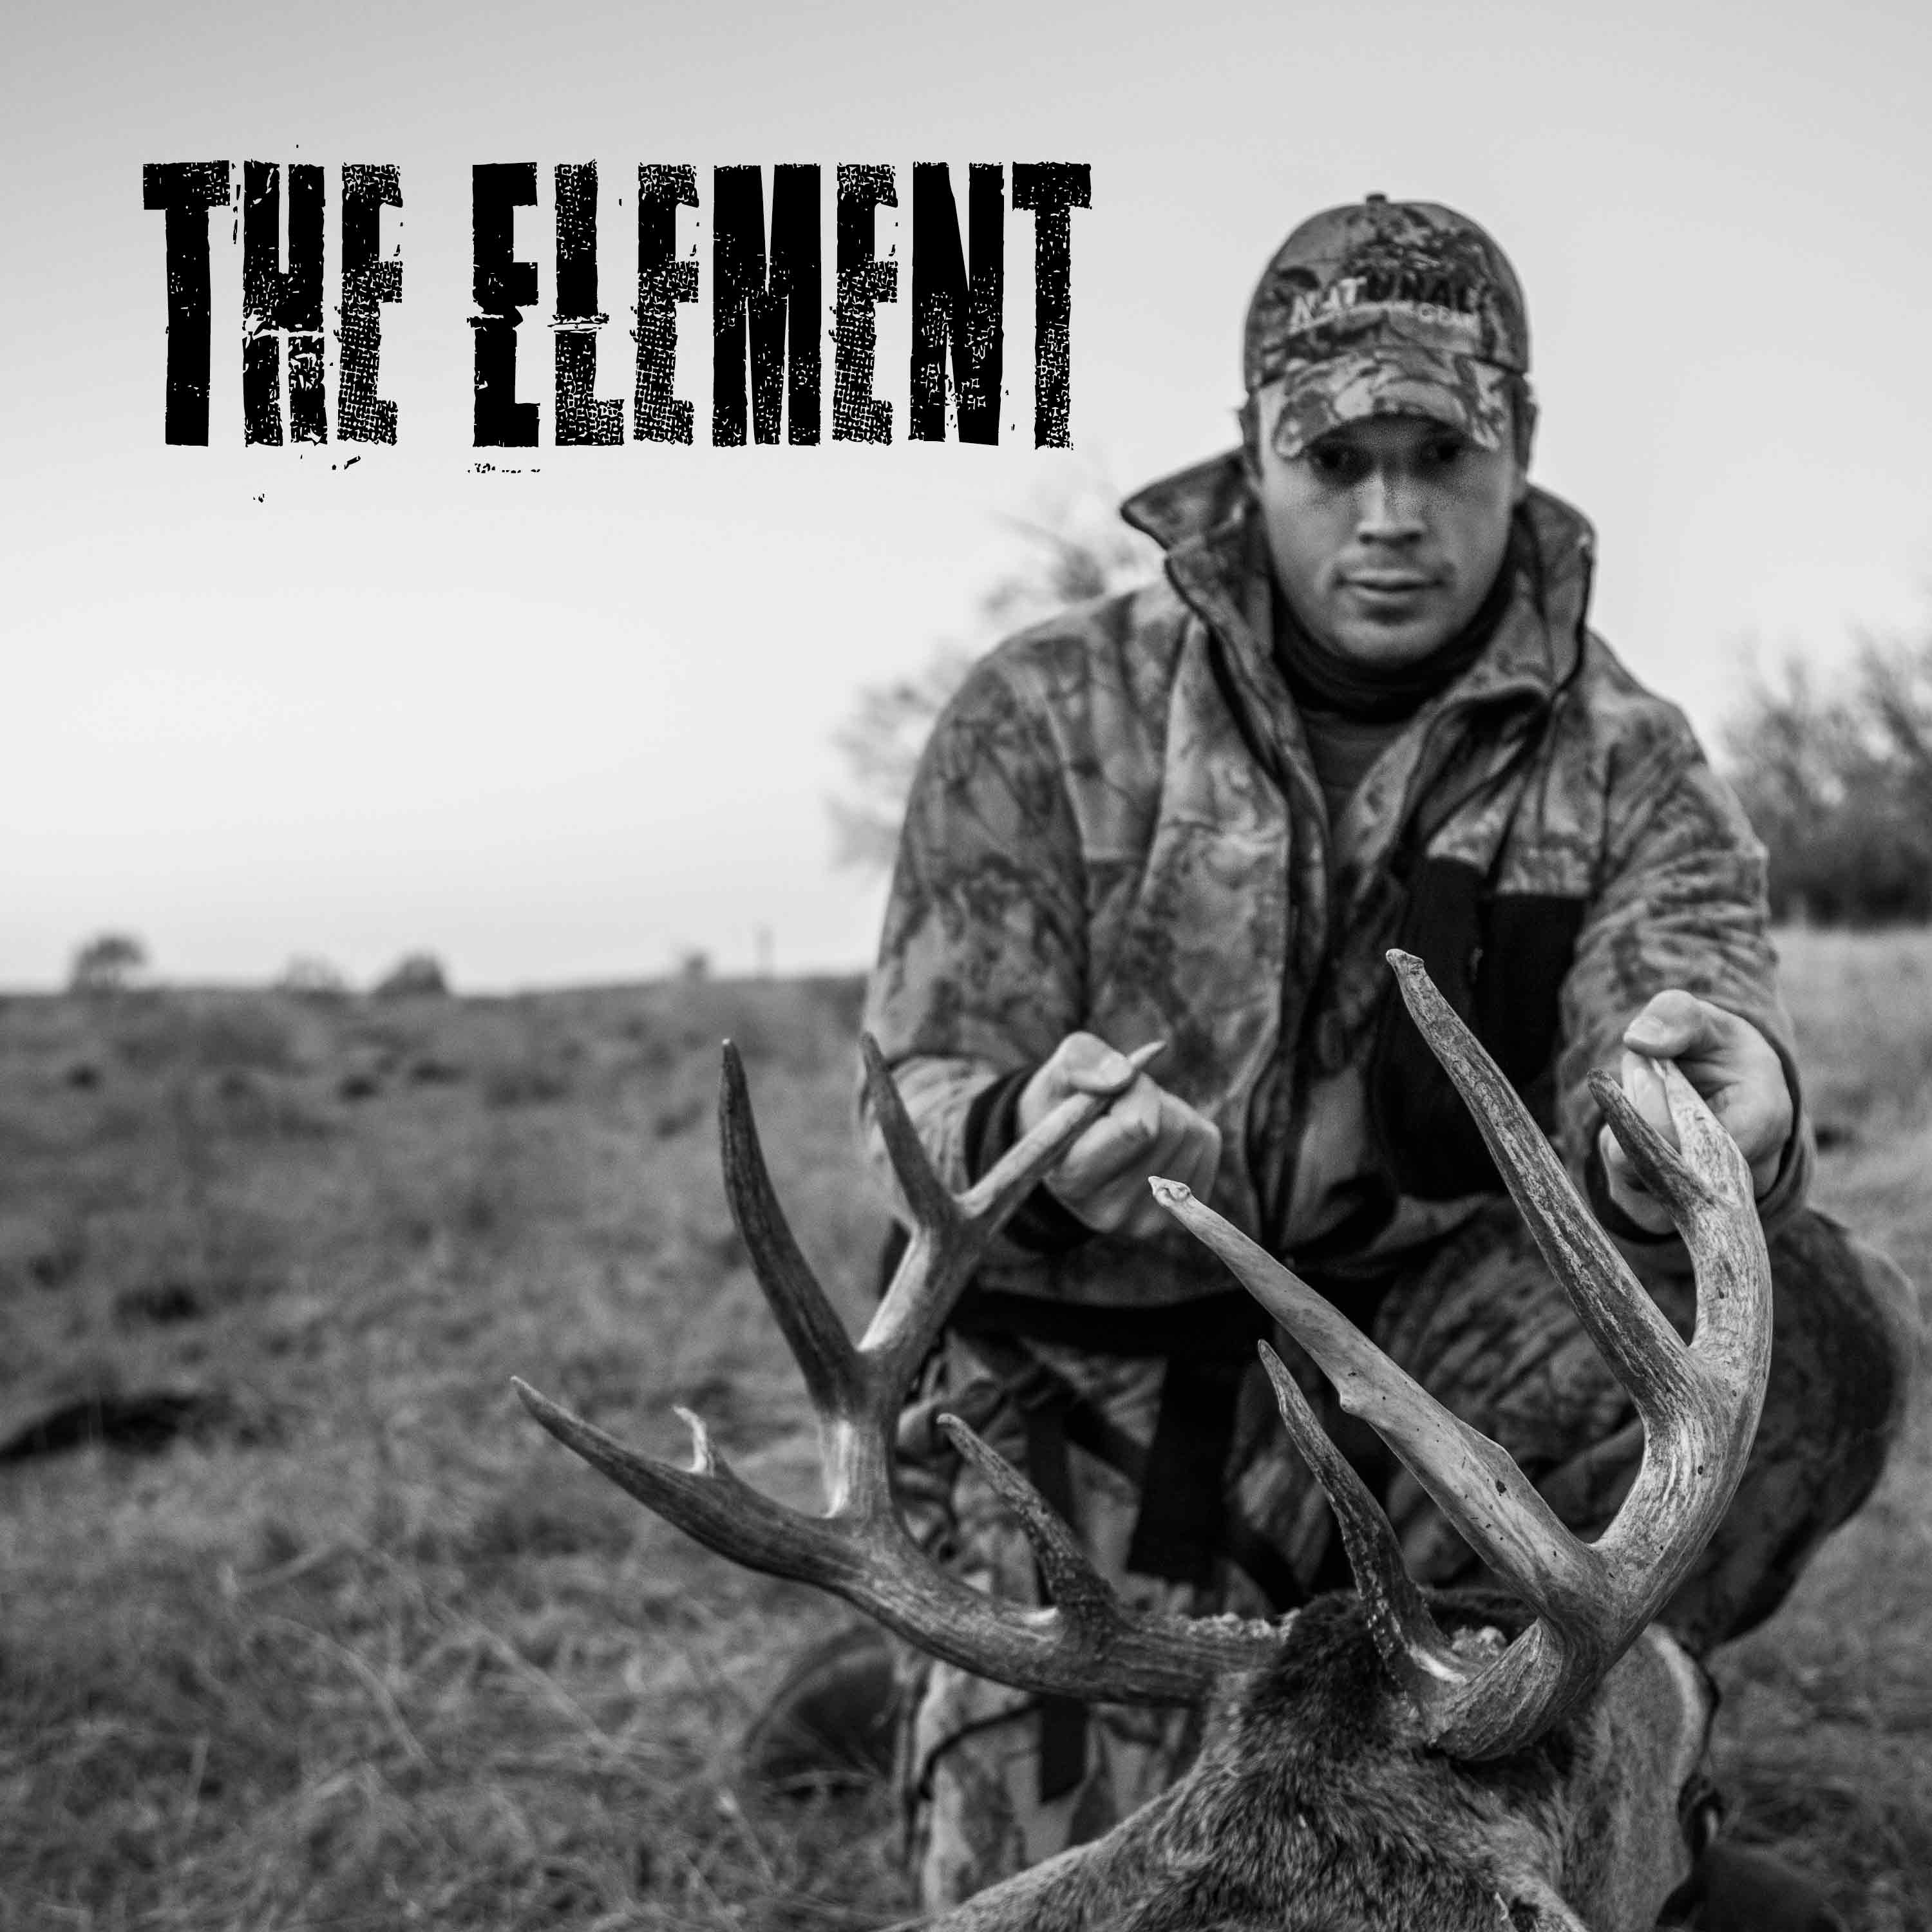 E78: Focus (feat. Michael Hunsucker of Heartland Bowhunter on How to Make Great Shots on Whitetail Deer, Great Hunting Stories, and Much More)